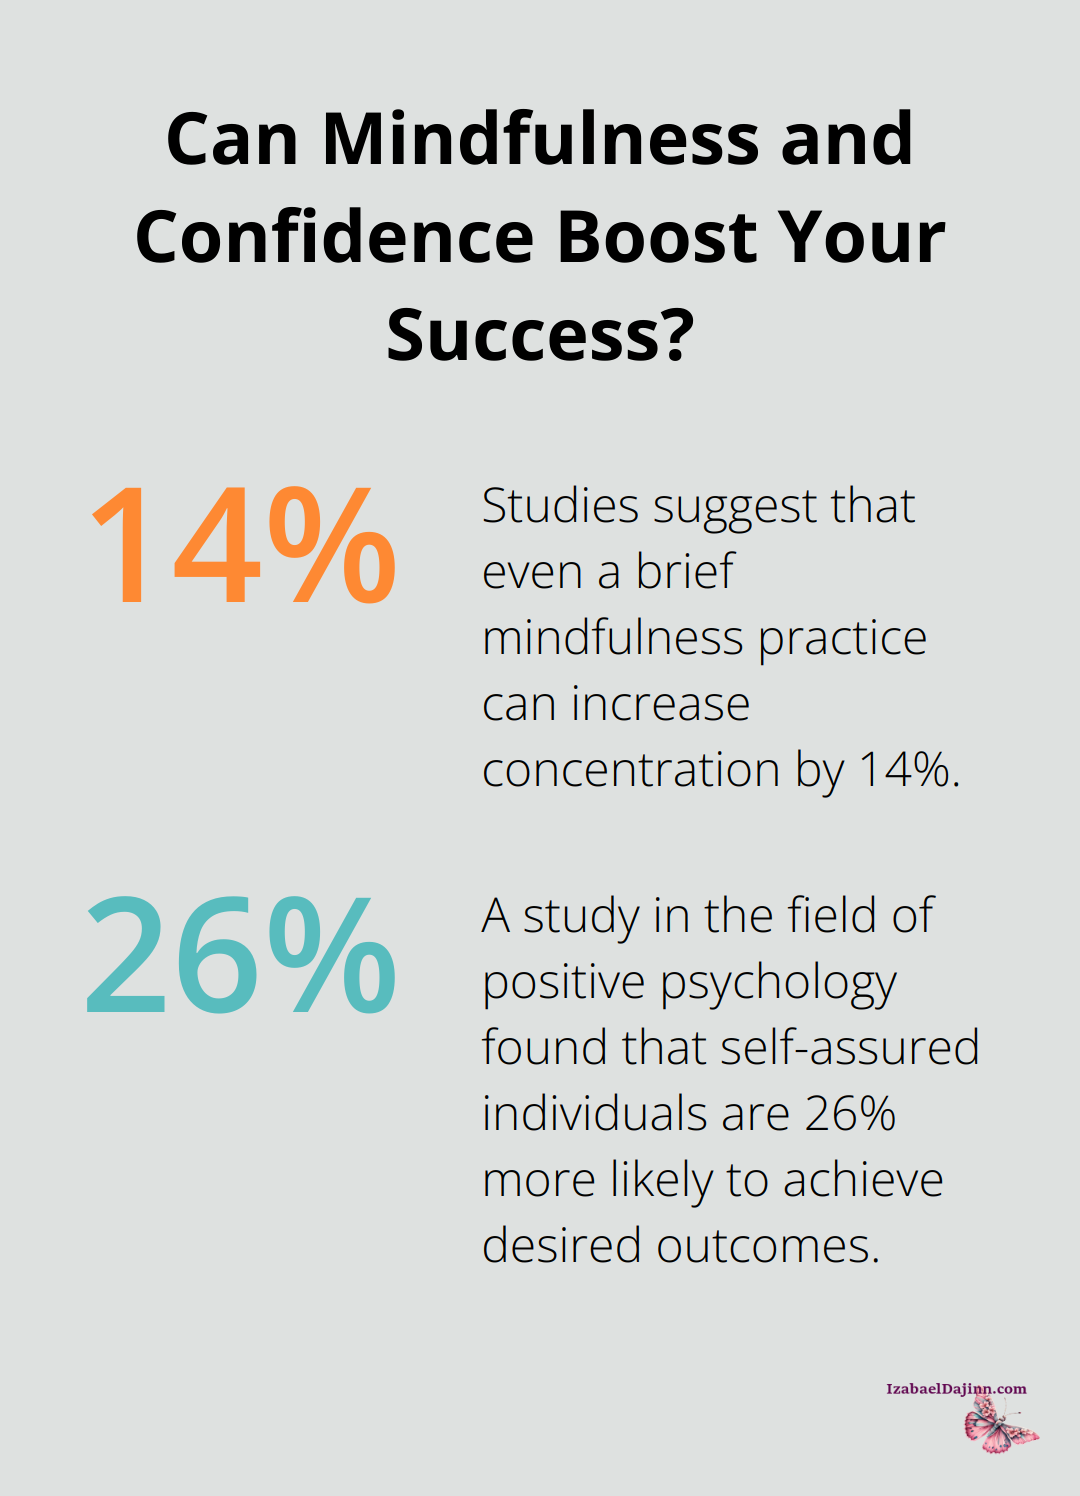 Fact - Can Mindfulness and Confidence Boost Your Success?